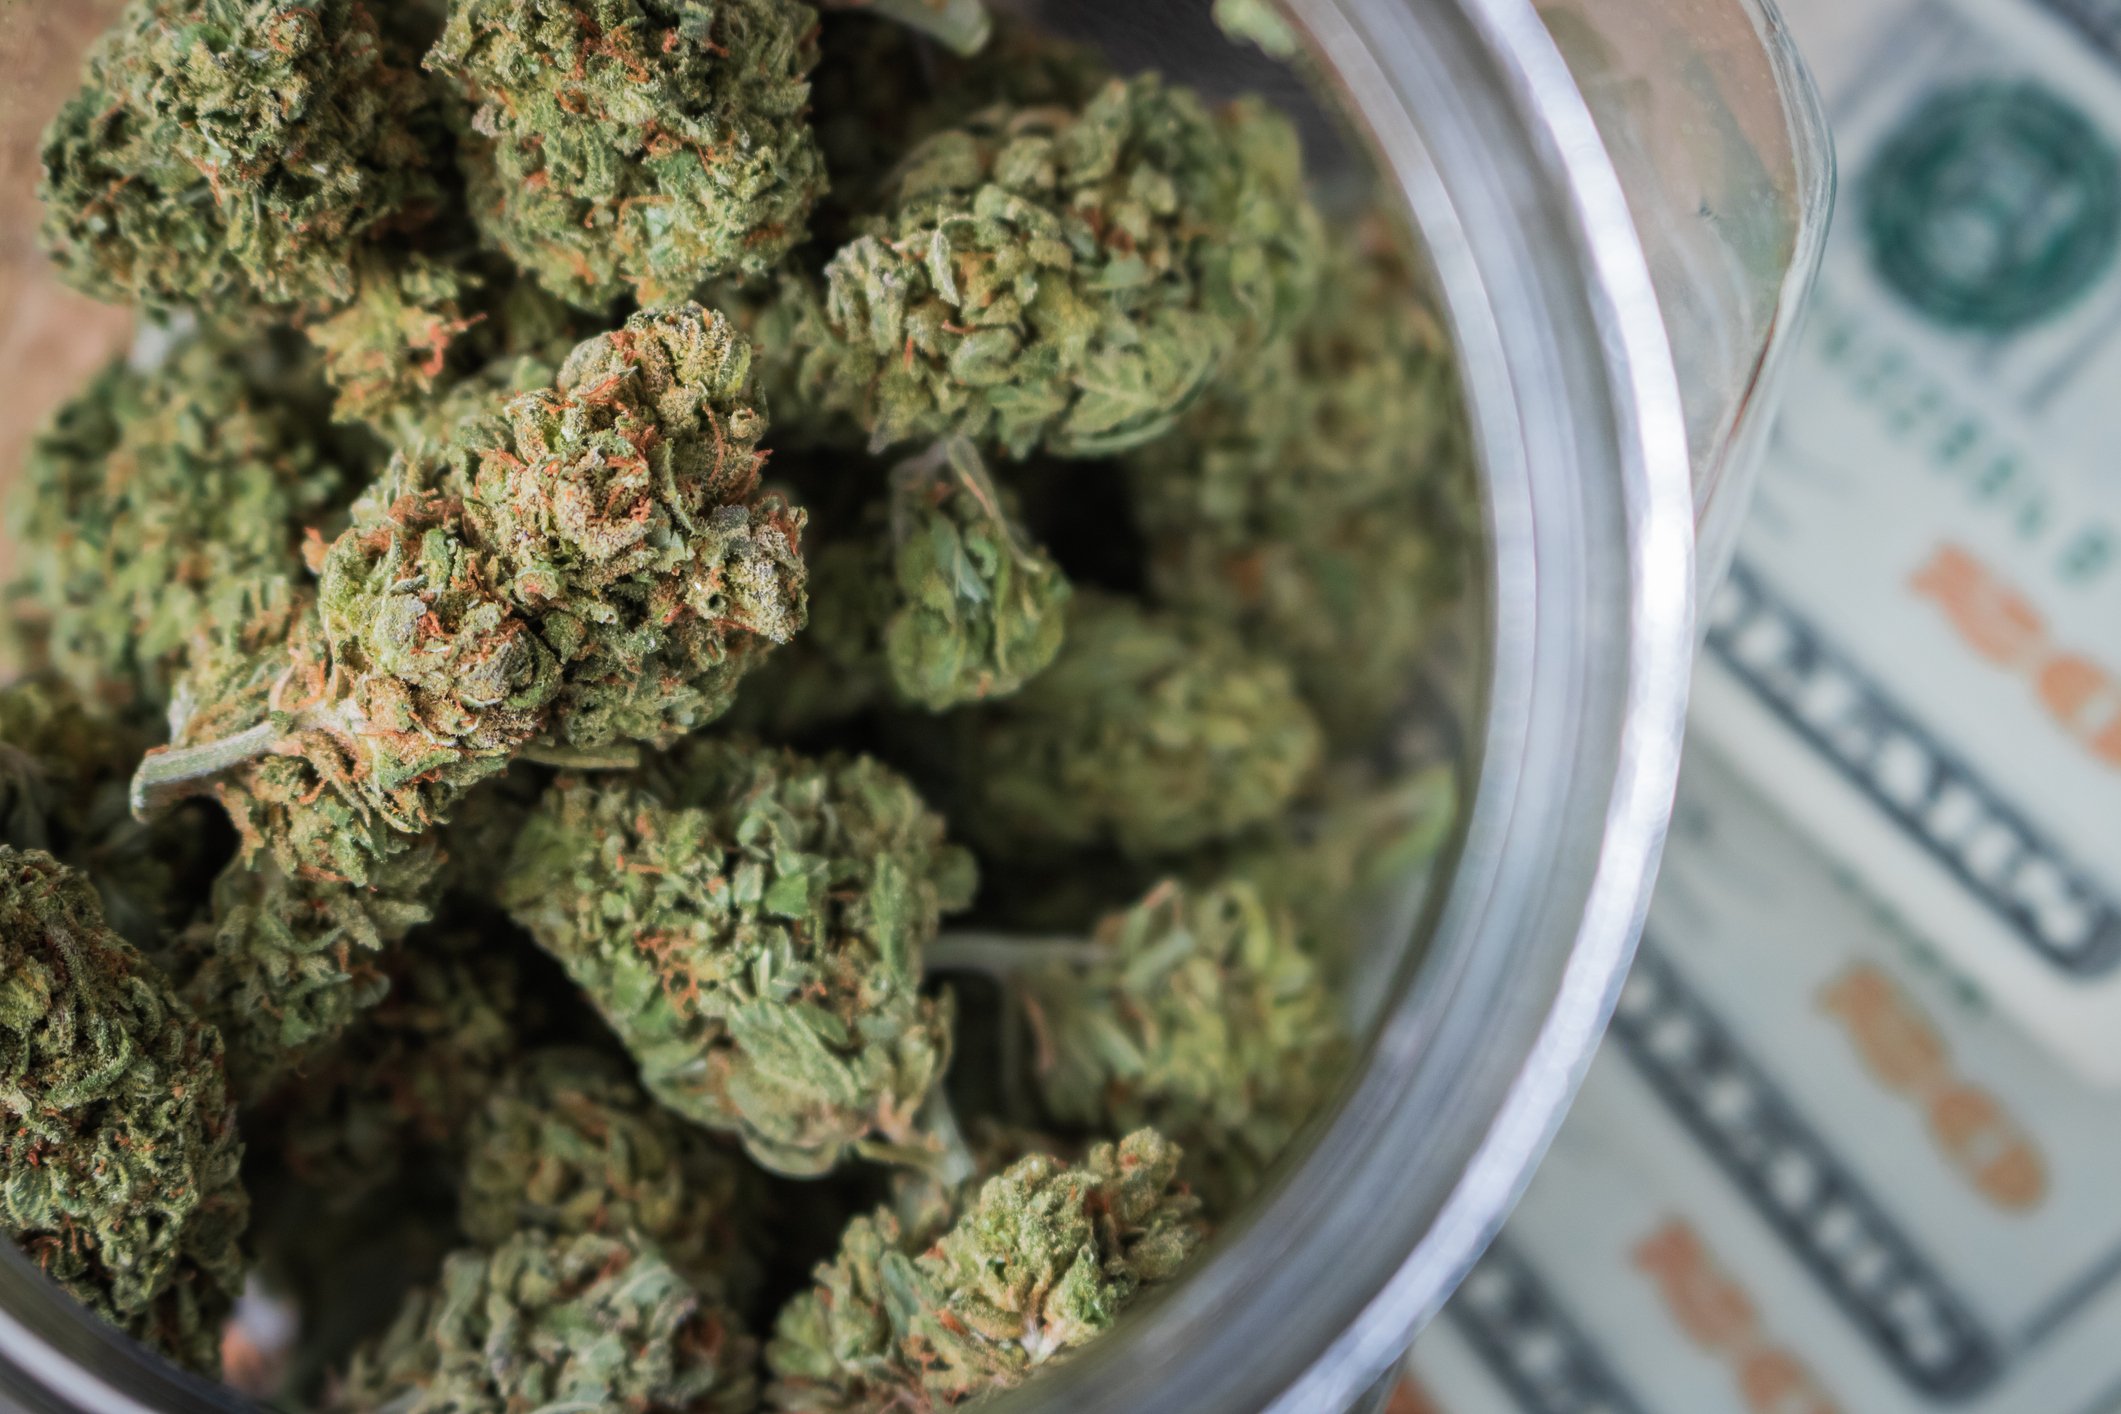 A Game-Changing Marijuana Banking Reform Bill Is Finally in the Works